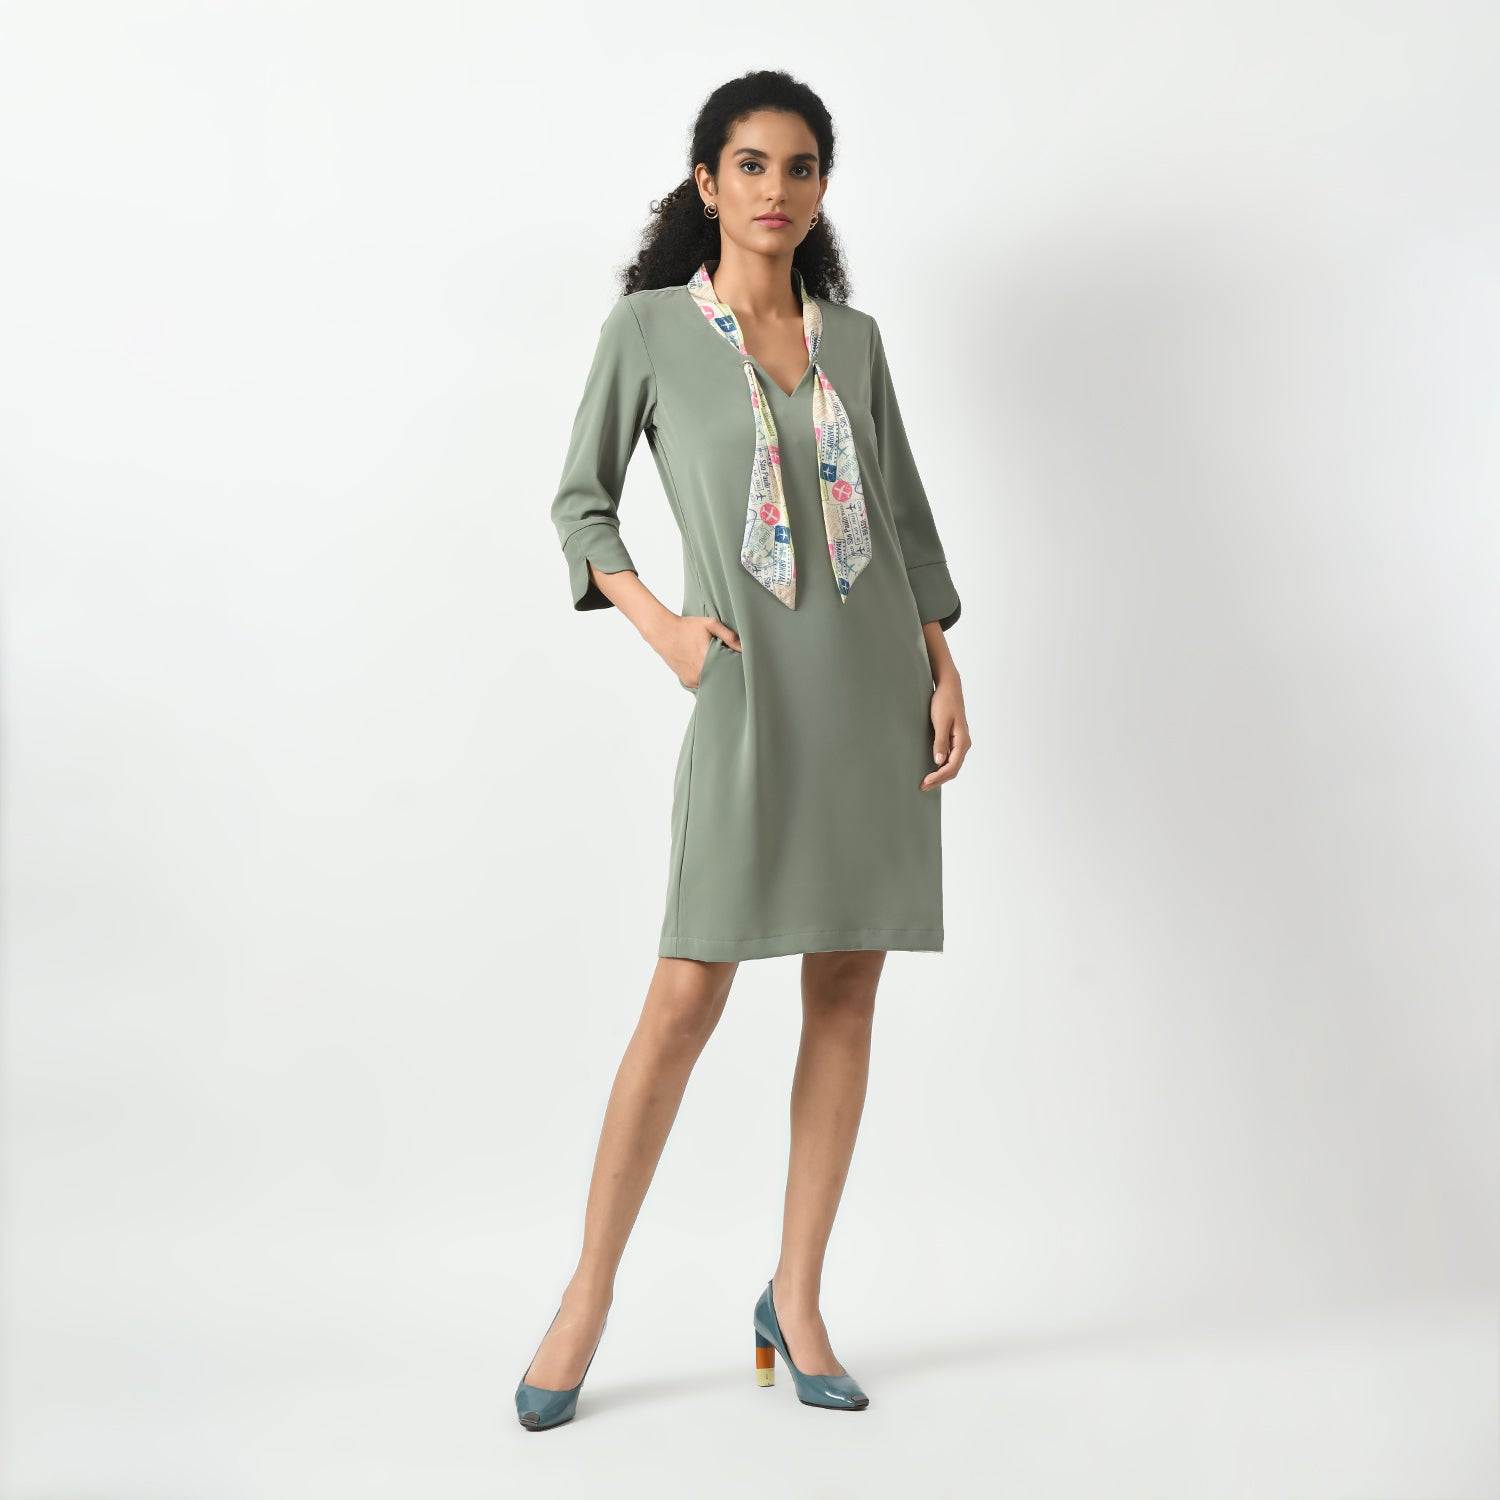 Dusty Green Dress With Tie Knot Collar